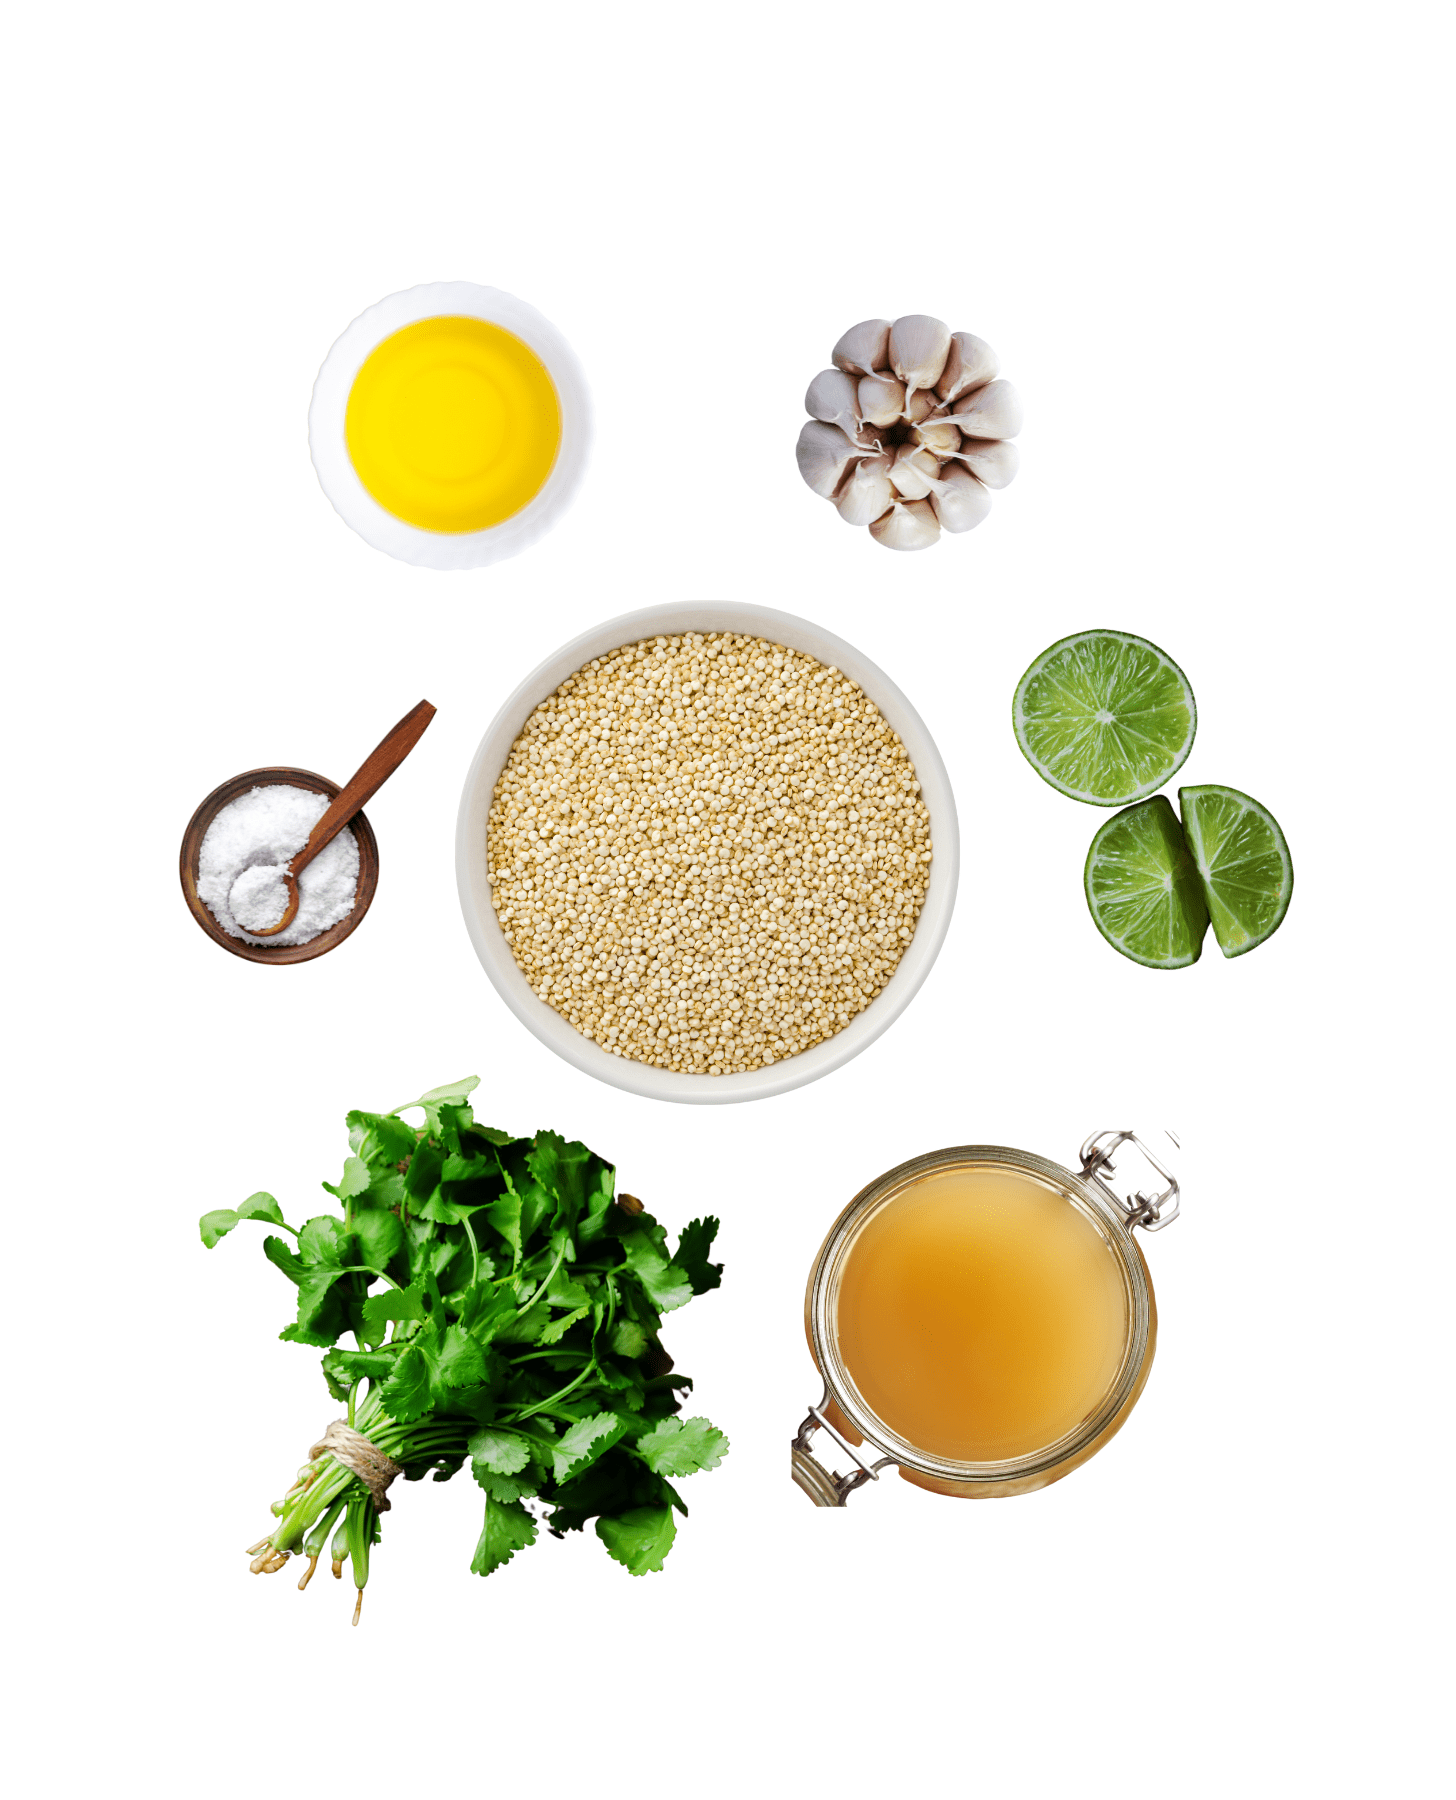 graphic showing food ingredients such as a bowl of quinoa, broth, herbs, oil and lime segments.